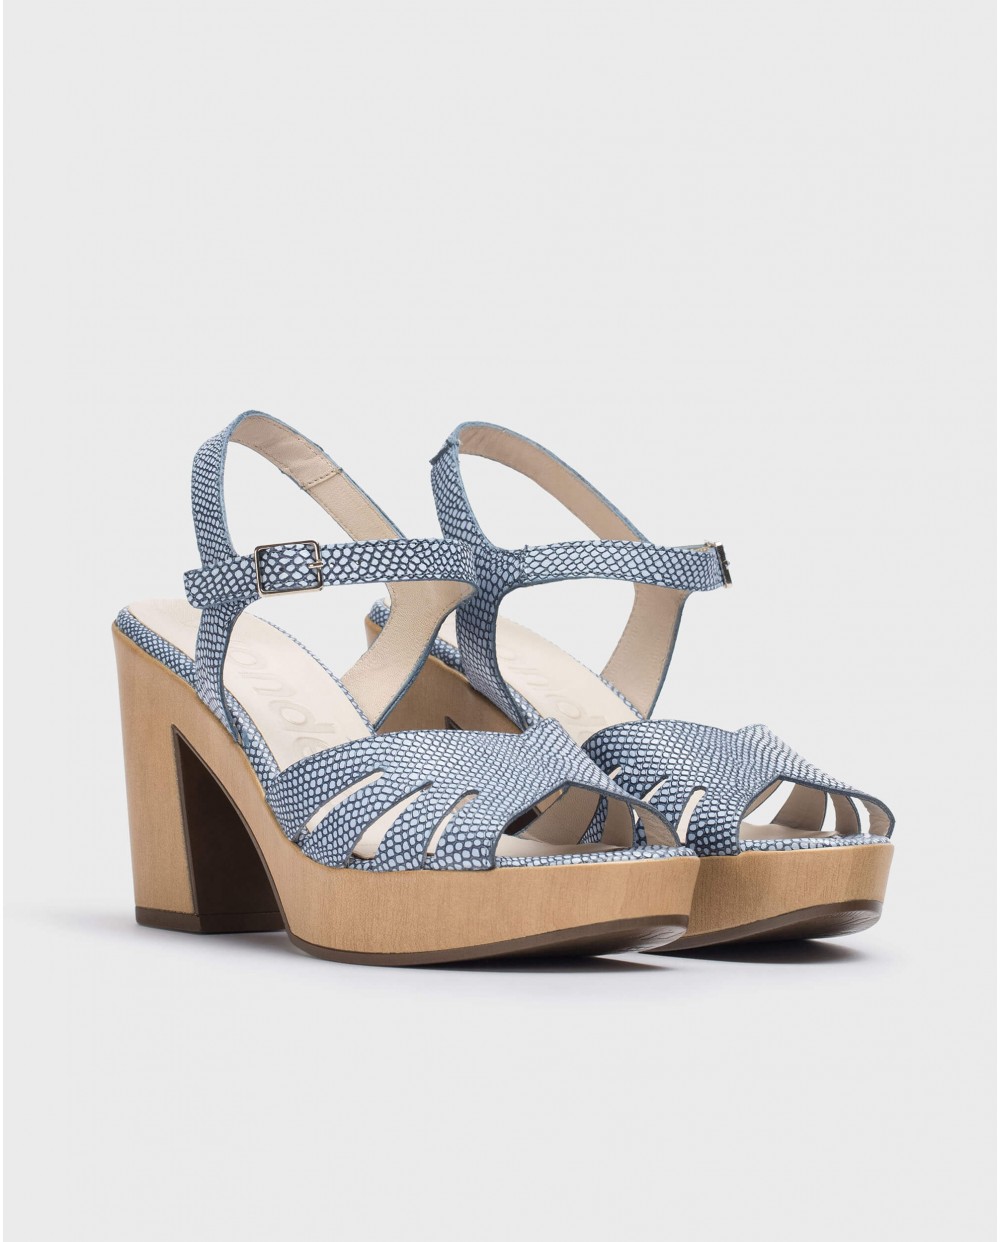 Wonders-Outlet-Sandal with side cut out detail